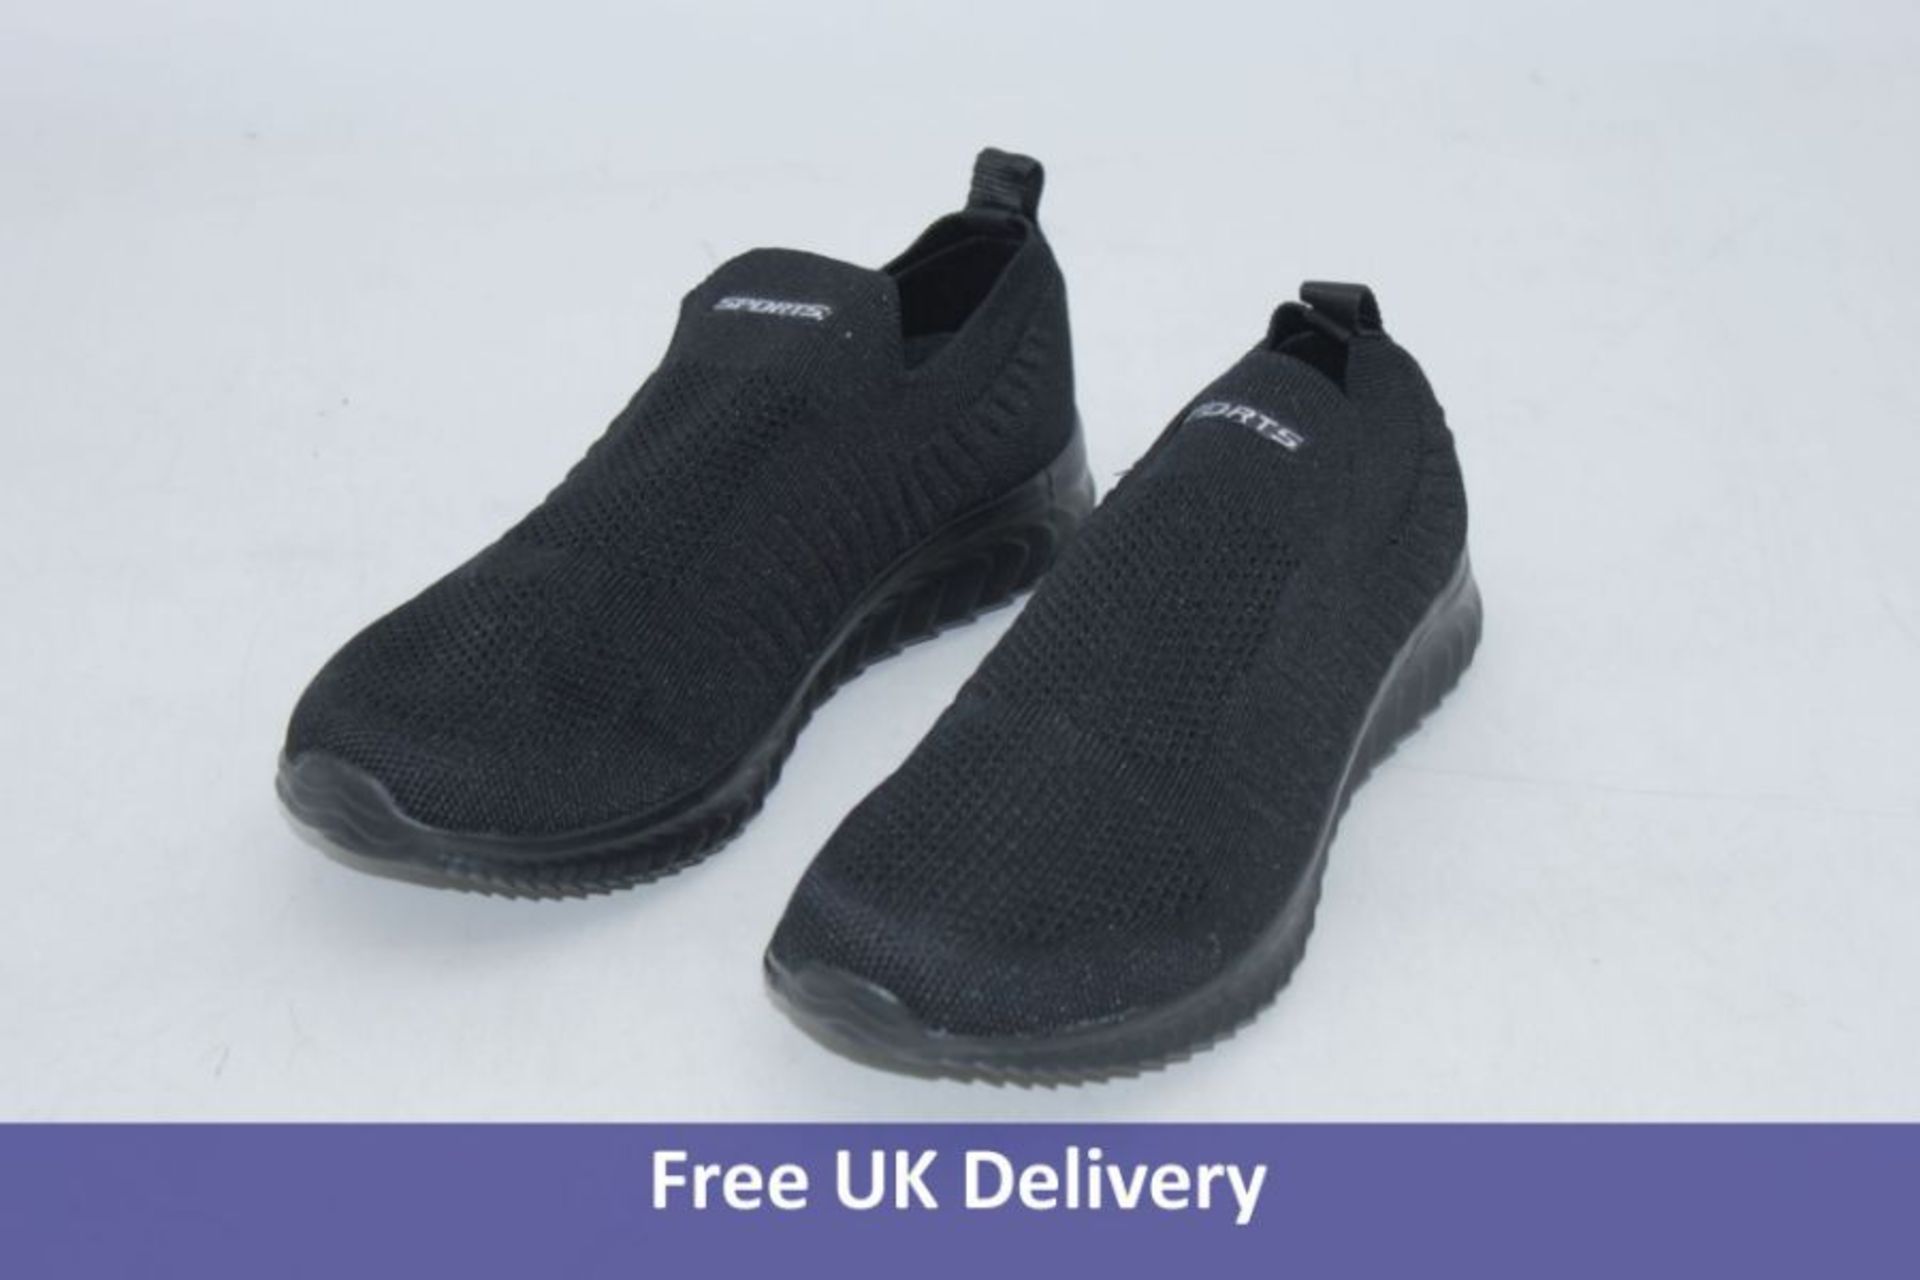 Six HKR Women's Slip-on Trainers with Memory Foam